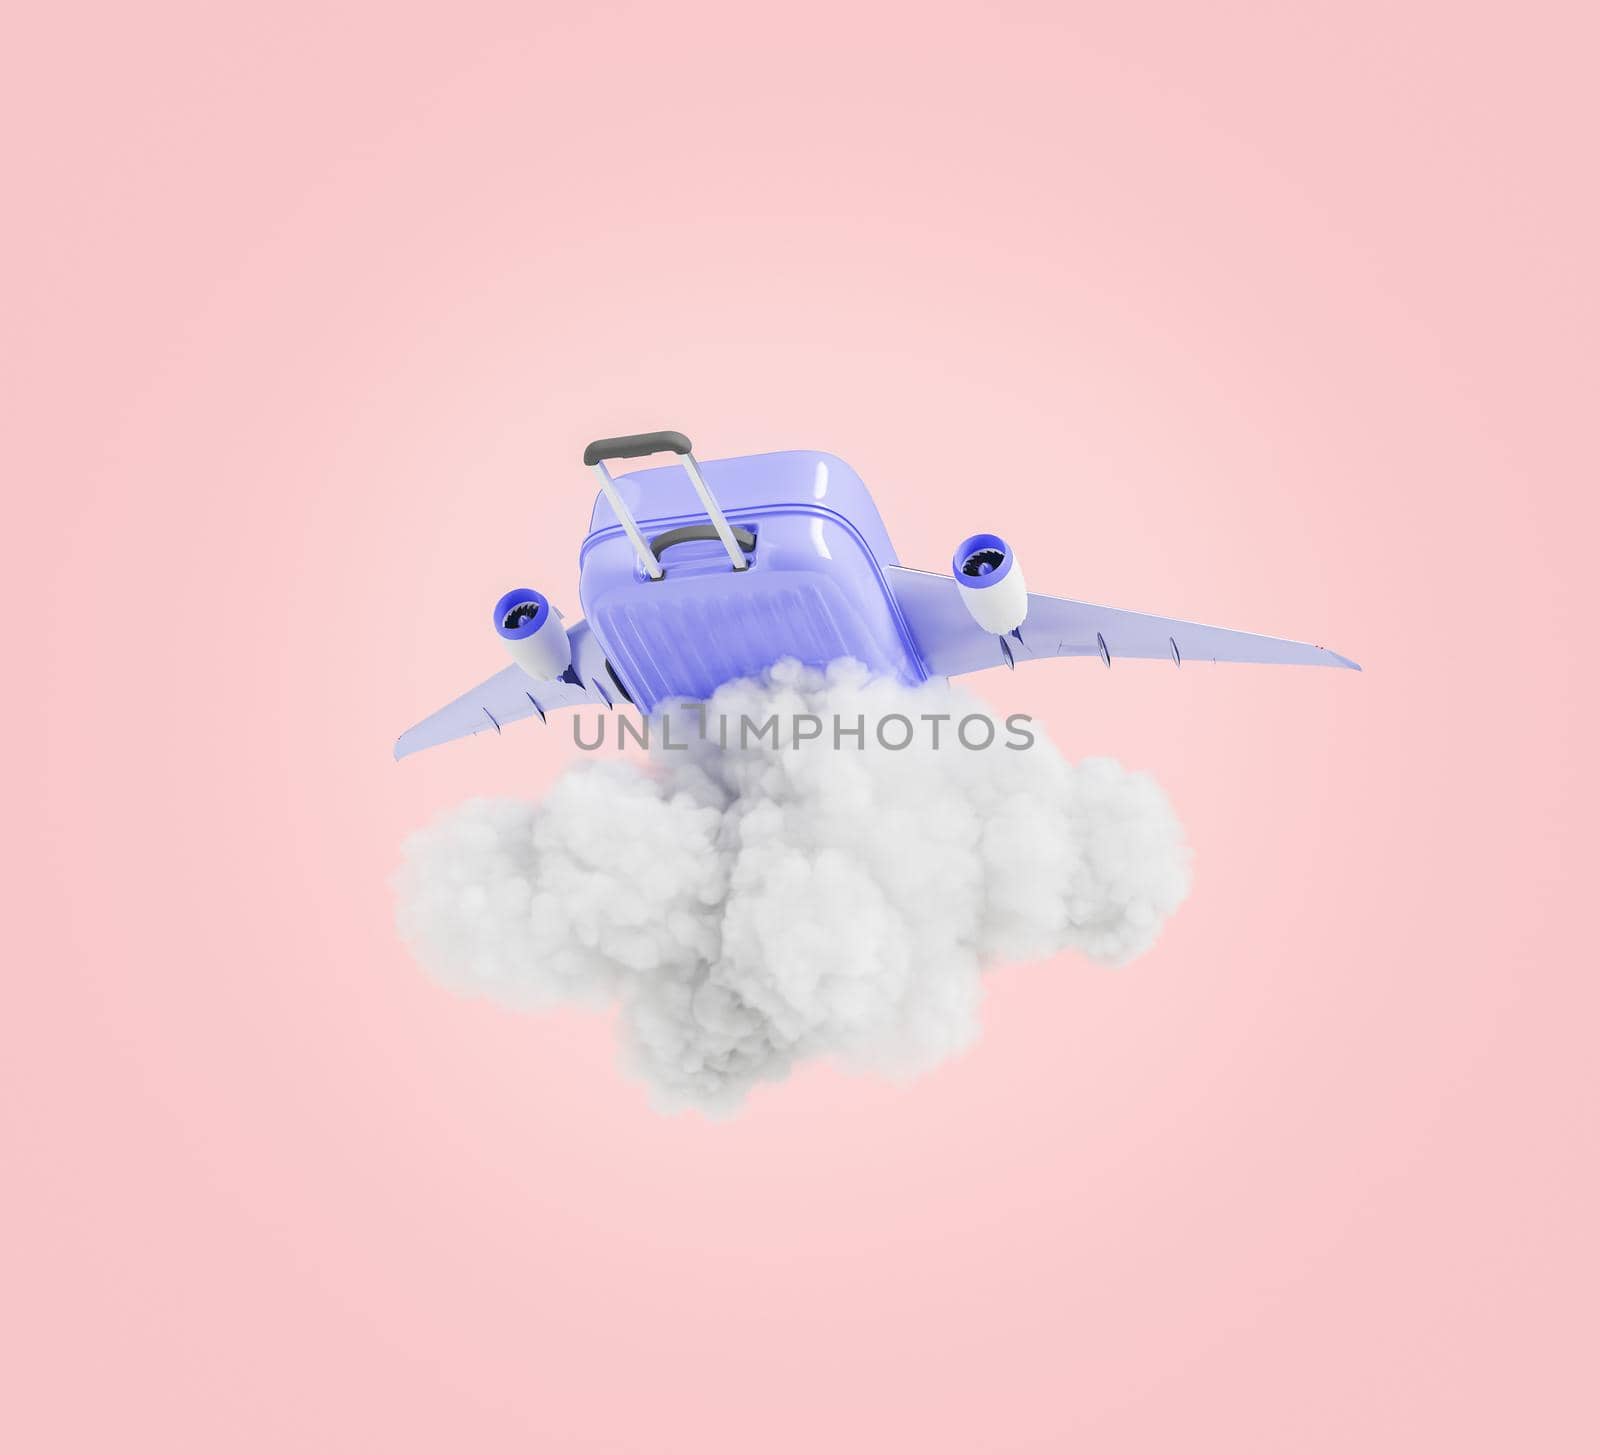 Airplane shaped suitcase over cloud by asolano